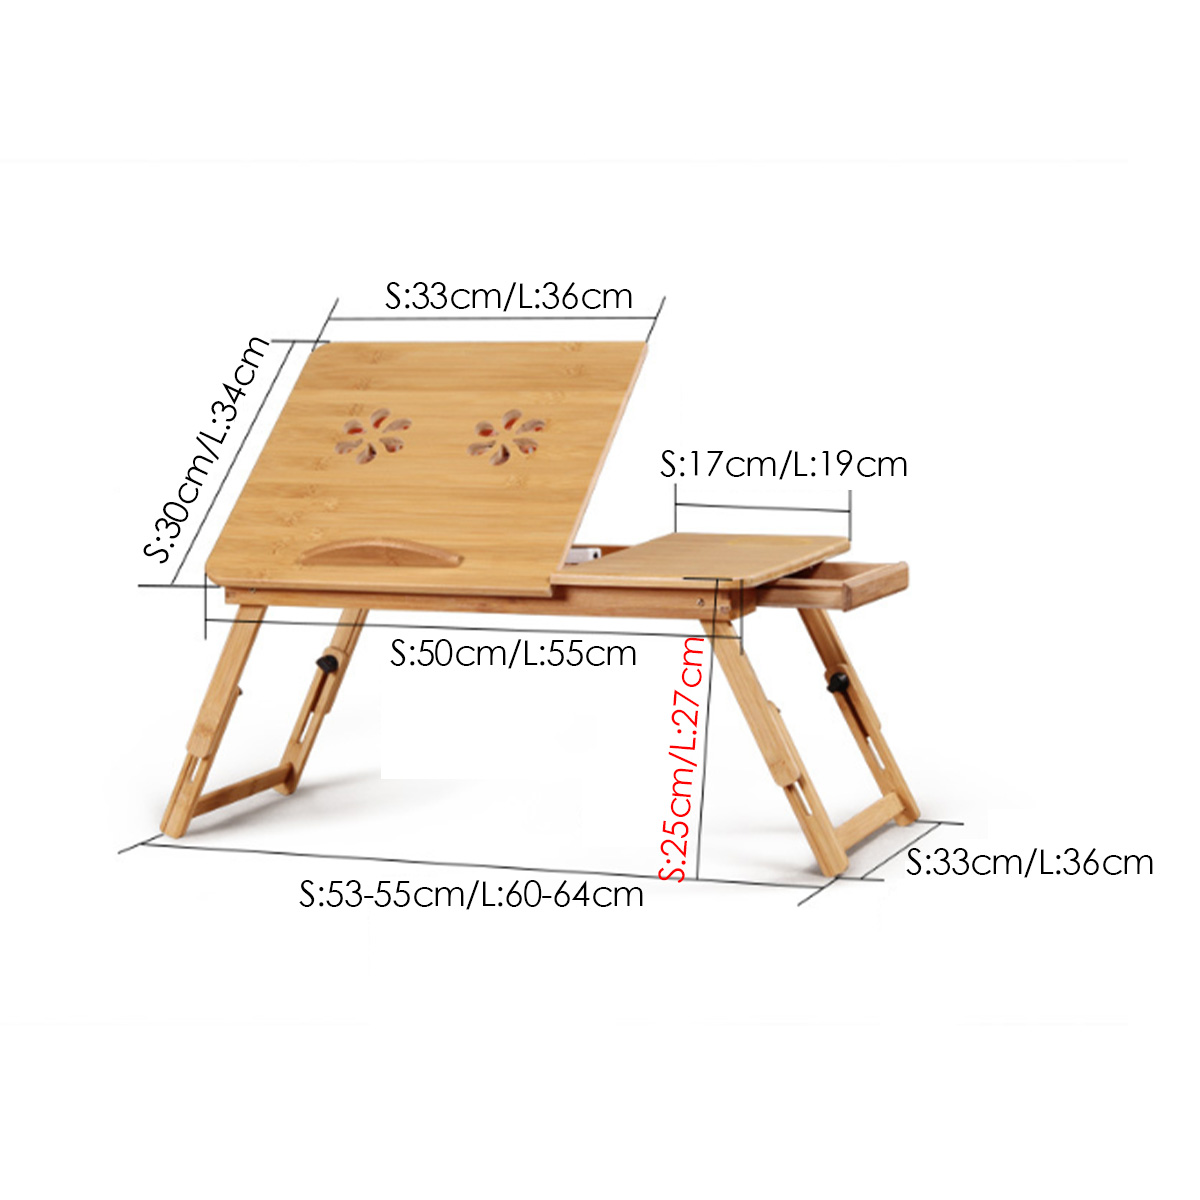 Portable-Bamboo-Laptop-Bed-Desk-Table-Foldable-Workstation-Tray-Lap-Fold-1719036-4